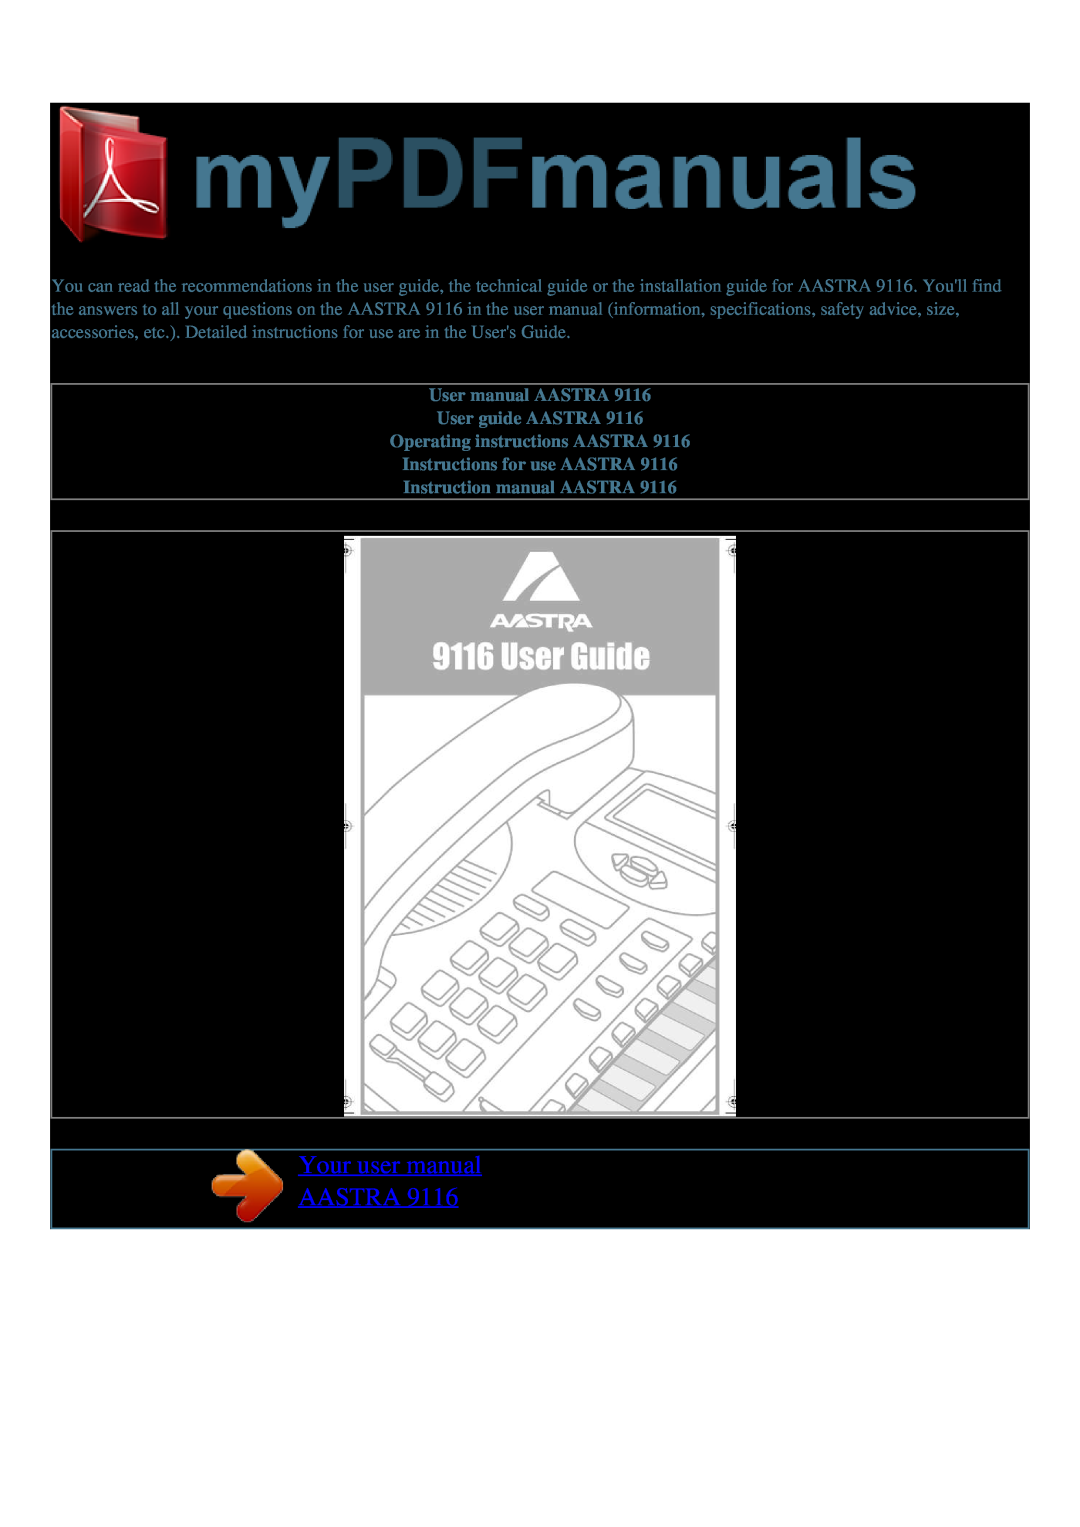 Aastra Telecom AASTRA 9116 user manual User manual AASTRA User guide AASTRA Operating instructions AASTRA 